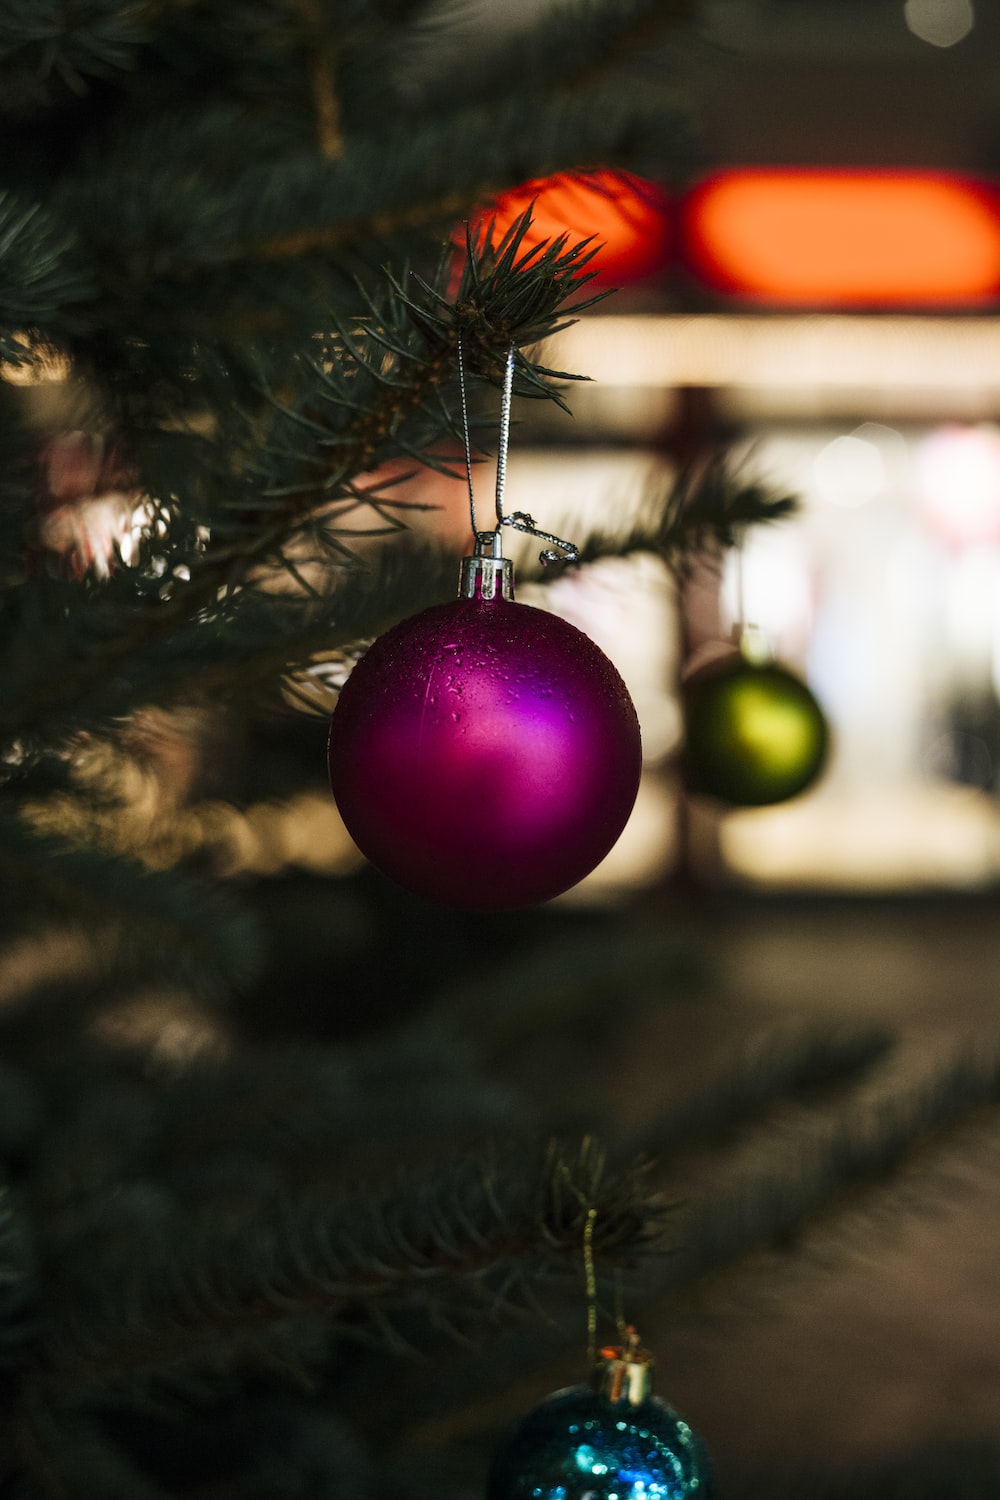 close-up selective focus shot of purple bauble hanging on Christmas tree